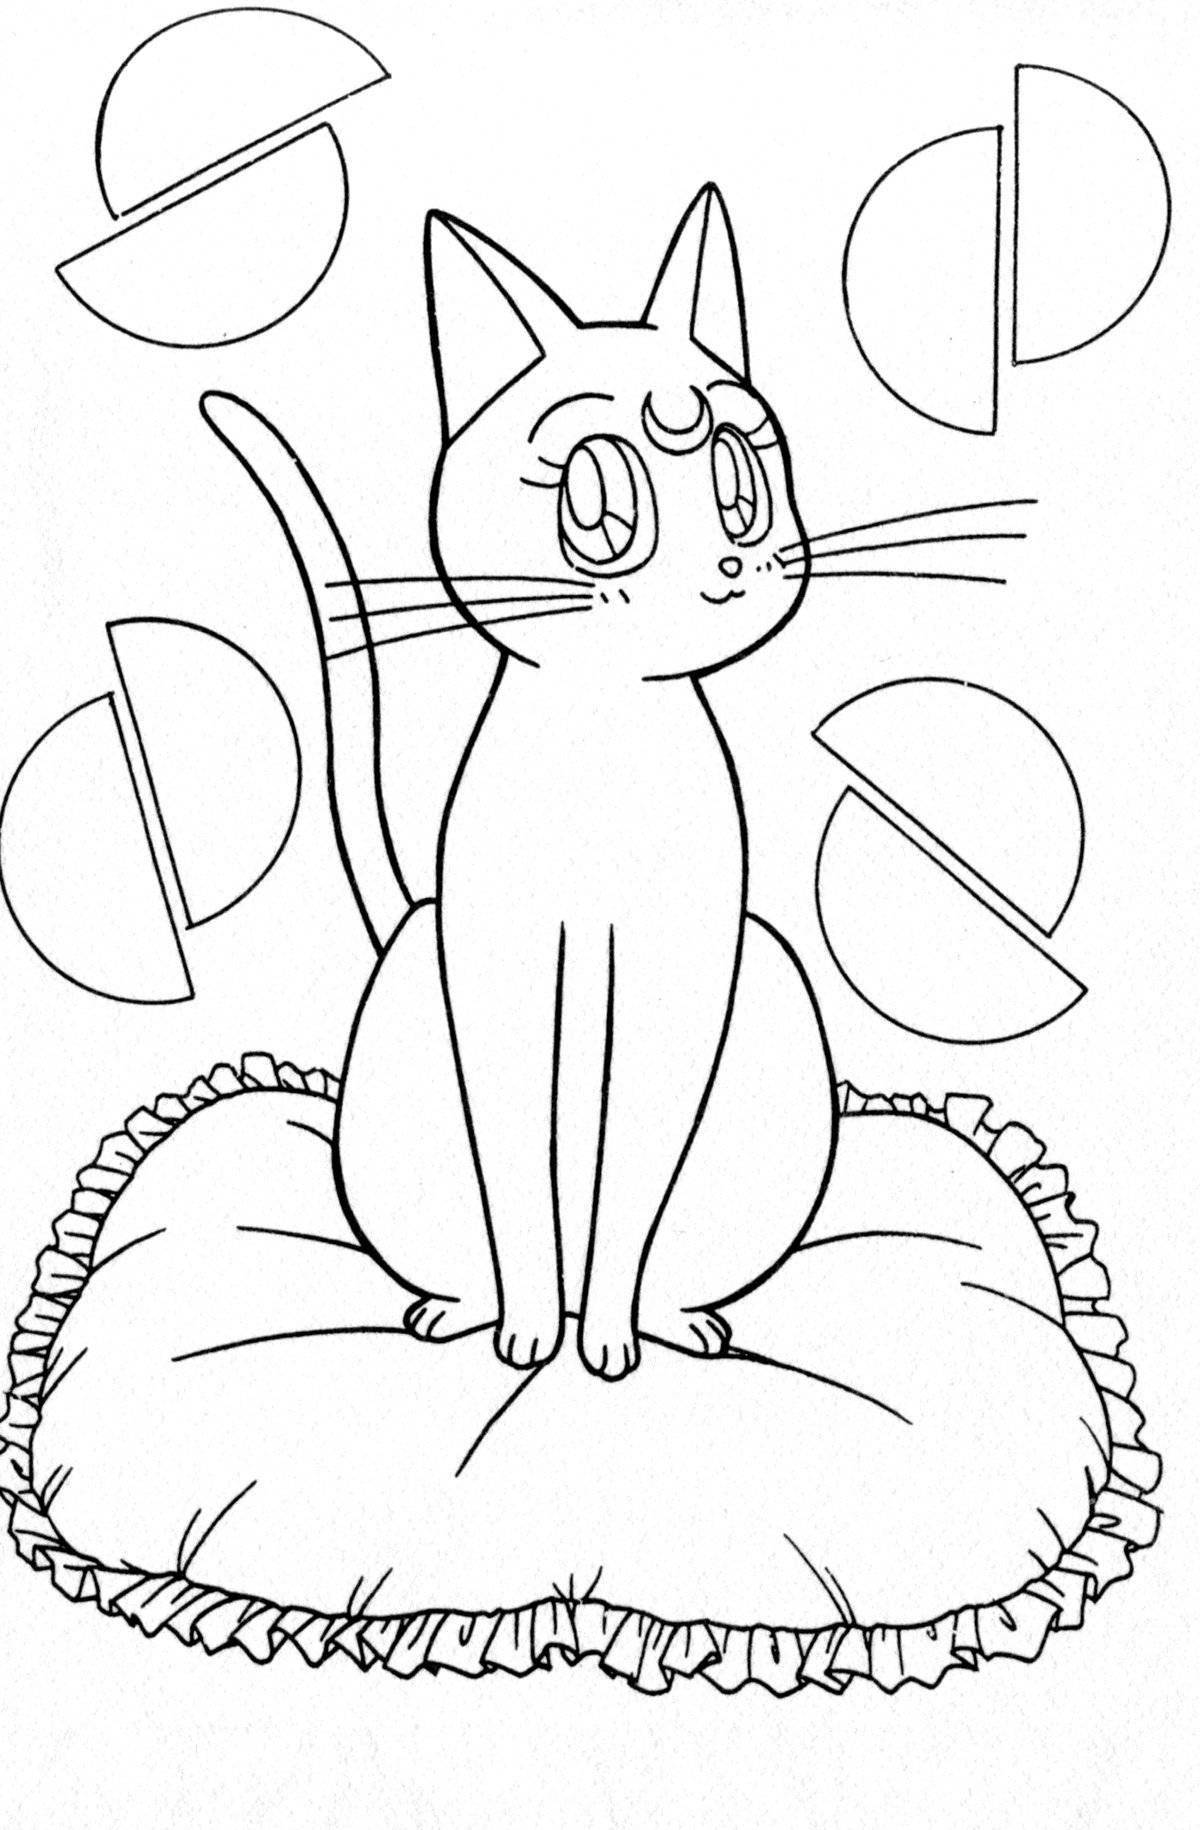 Coloring page amazing queen of cats